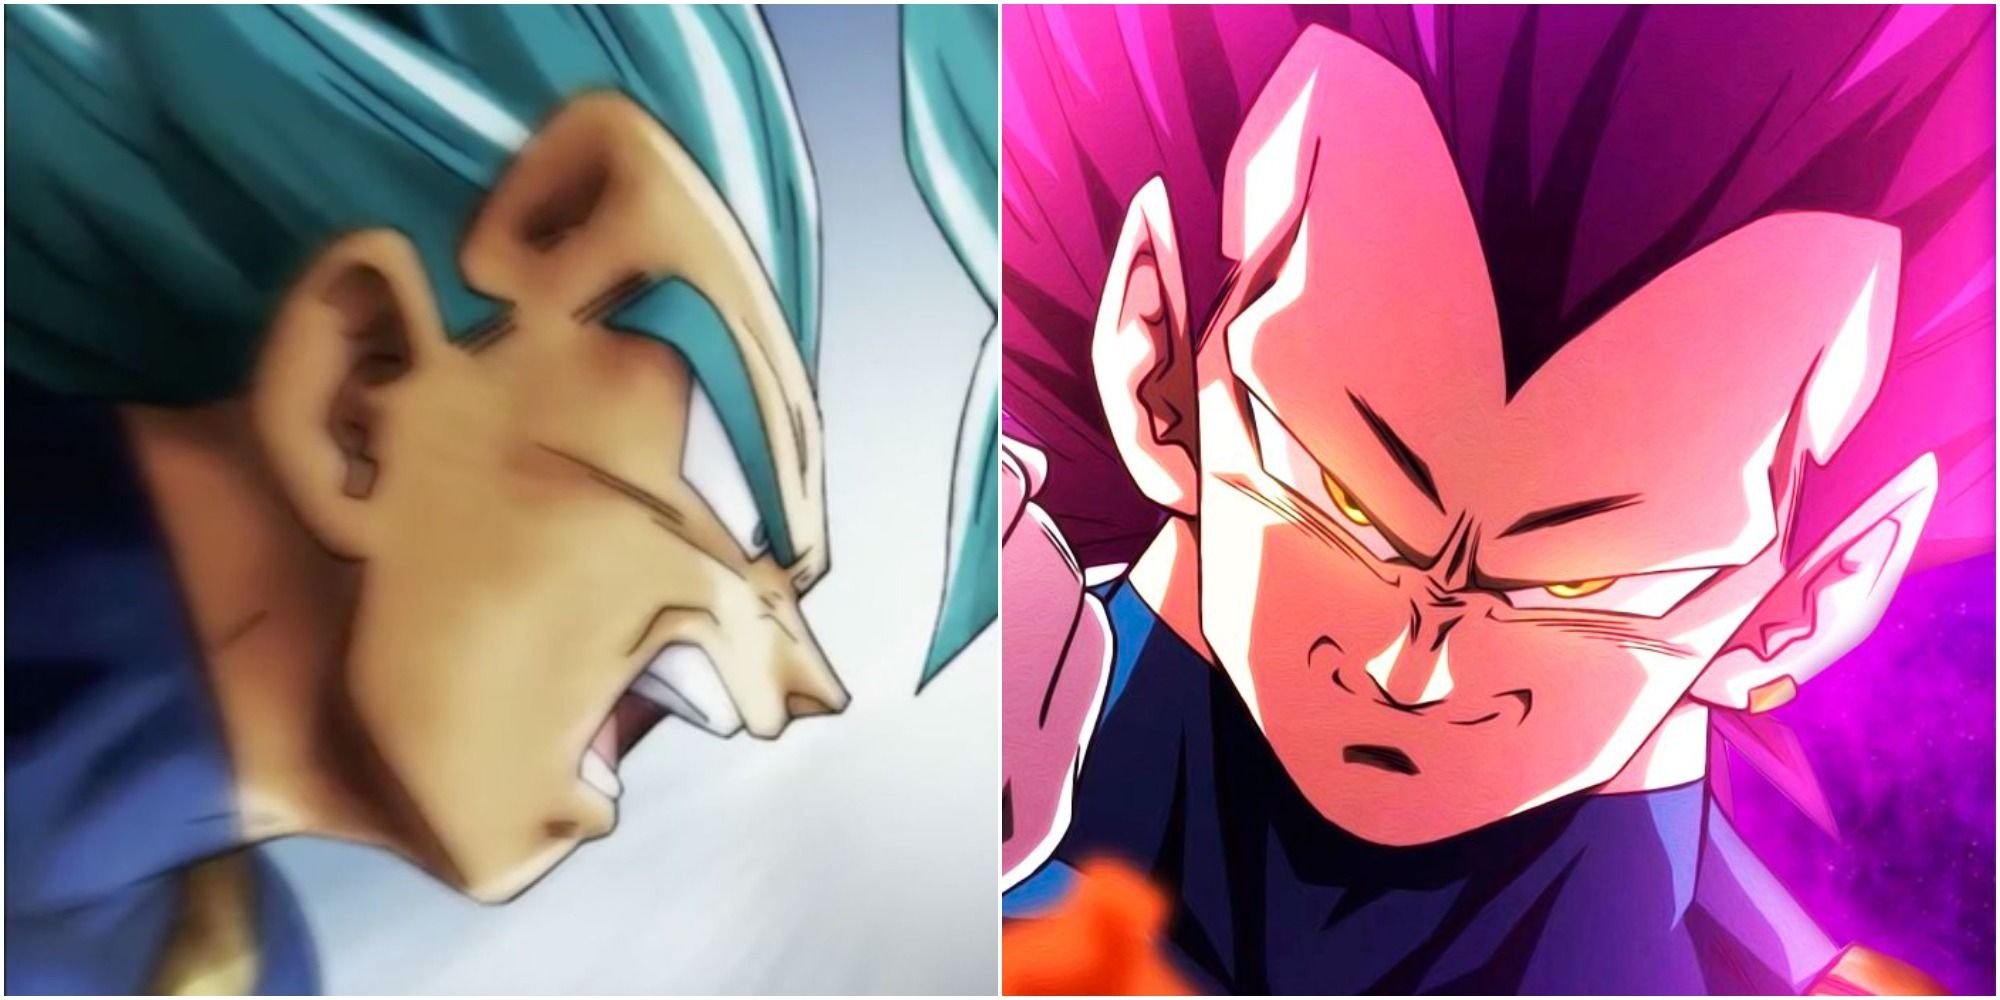 Vegeta's most iconic moves in Dragon Ball